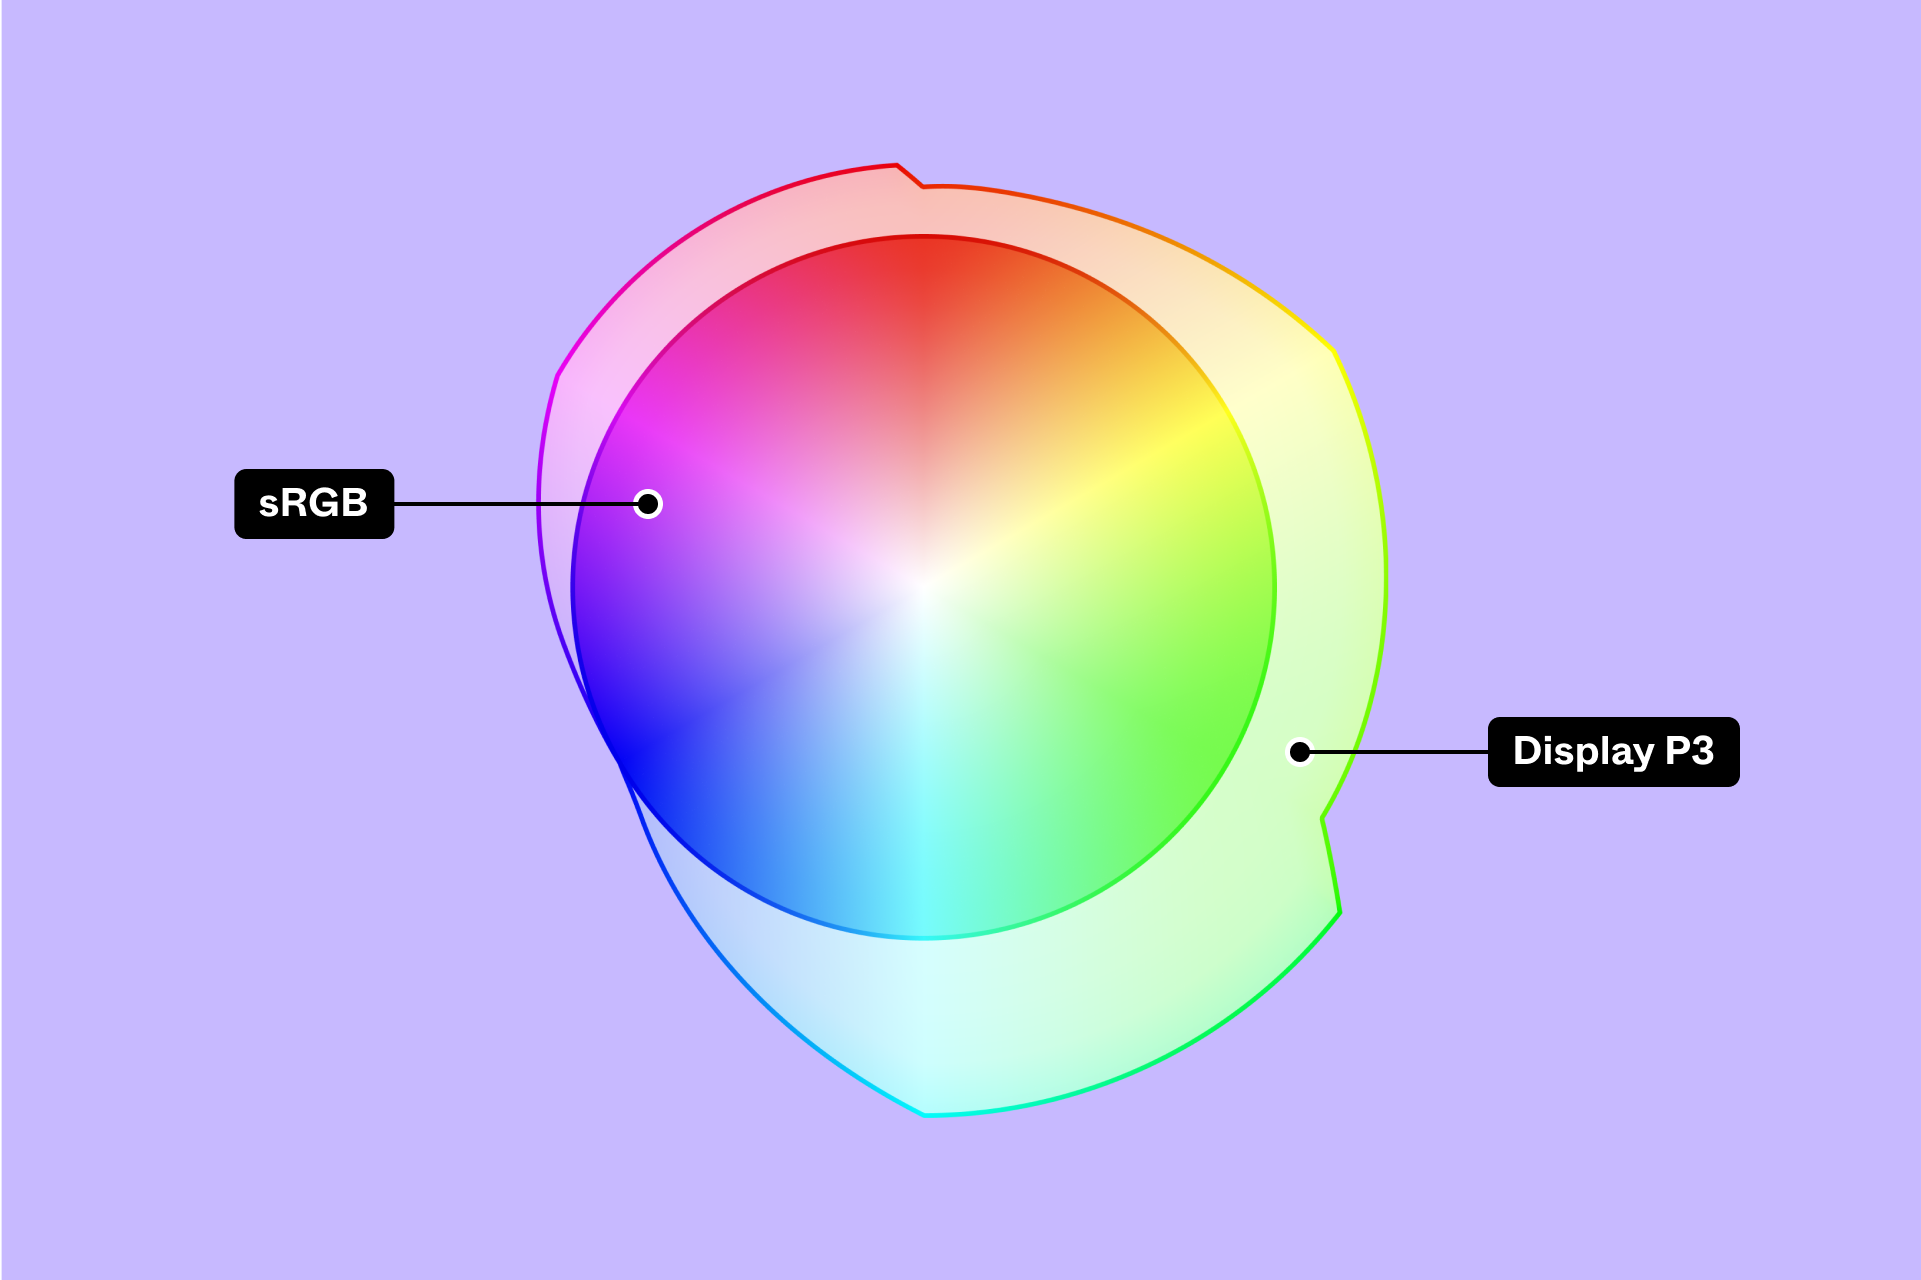 a graph showing the color gamuts of sRGB and Display P3, inner circle labelled sRGB, outer circle labeled Display P3 